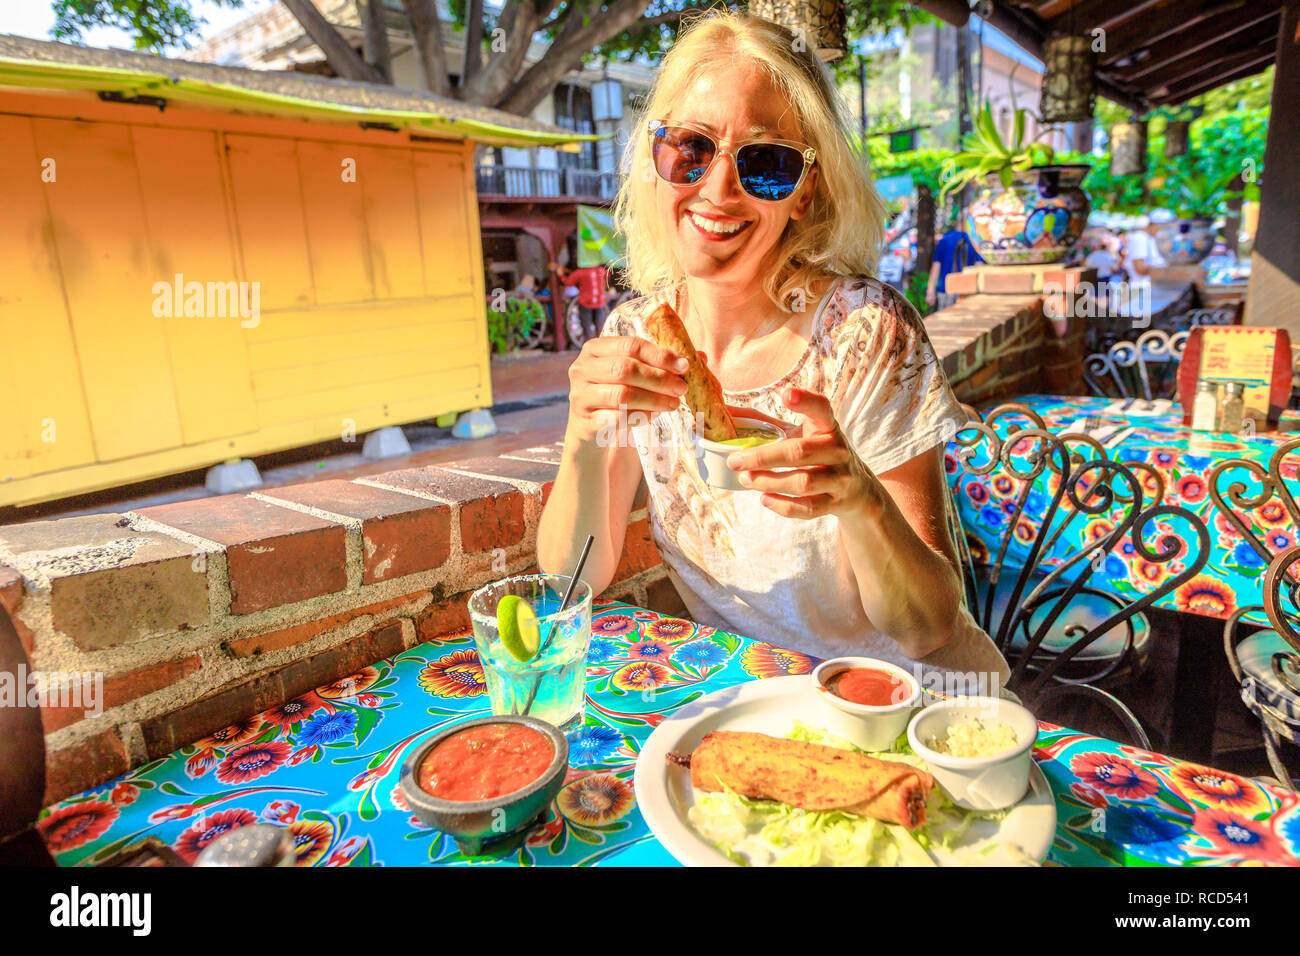 Joyful blonde woman puts enchilada in chili sauce, at typical Mexican food, at traditional restaurant of El Pueblo, Olvera street, Los Angeles Downtown State Historic Park, California, United States. Stock Photo